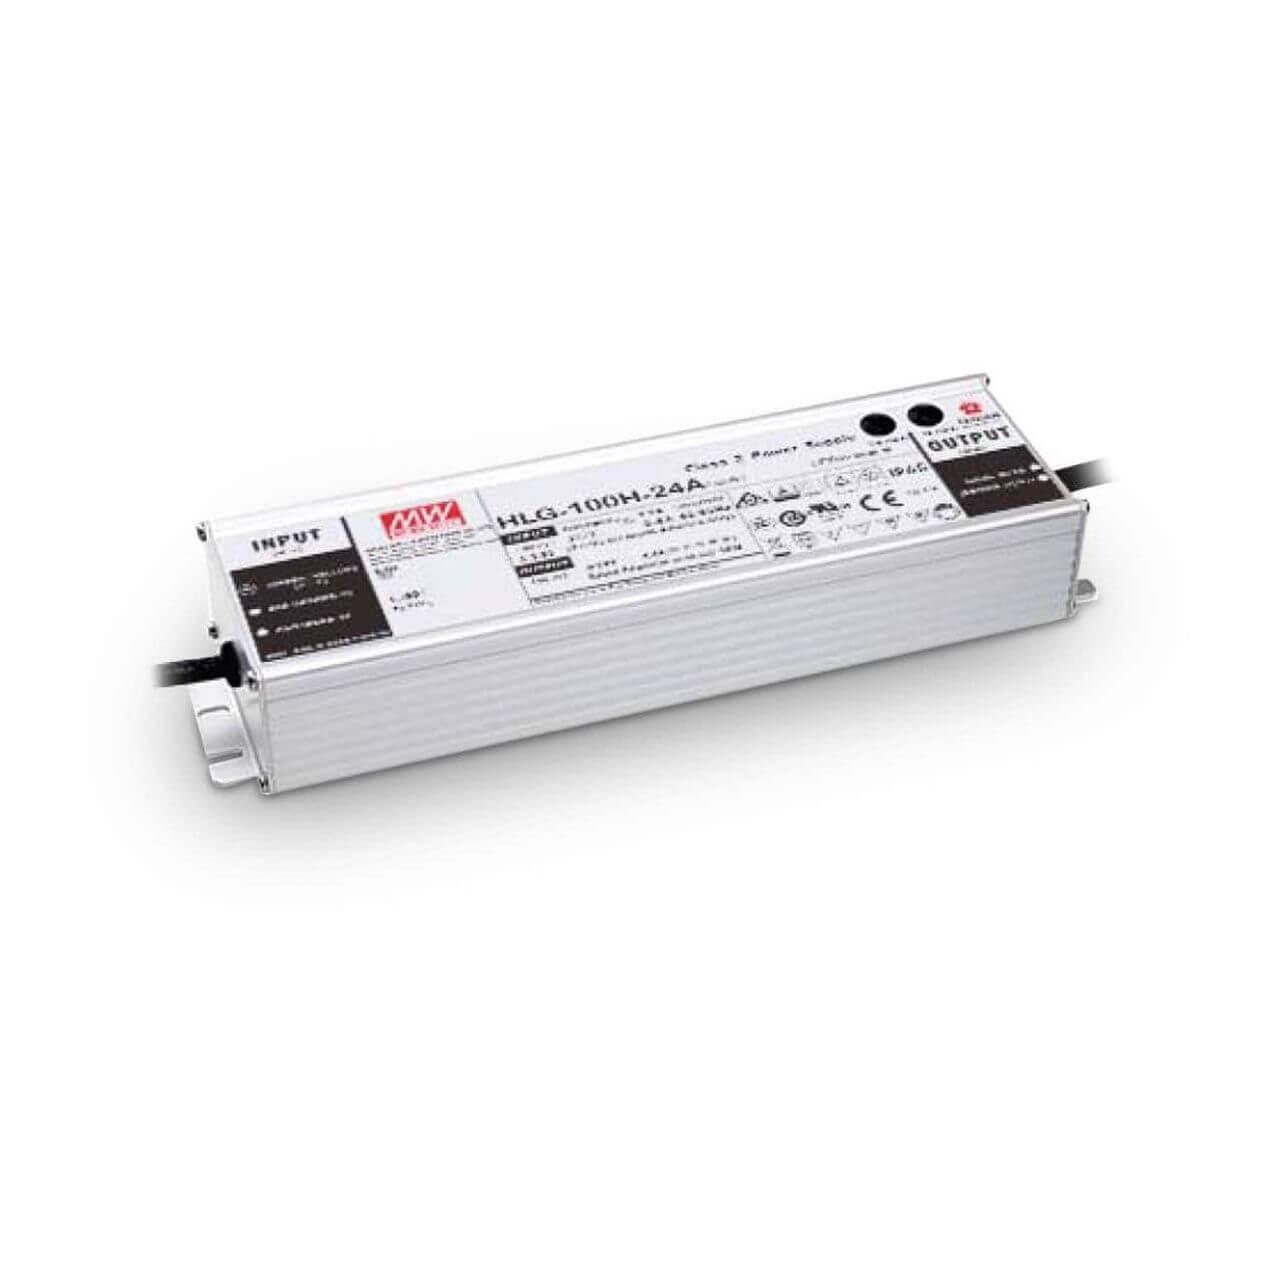  Ideal Lux 48V 150W IP20 Arca Driver On-Off 150W 223179